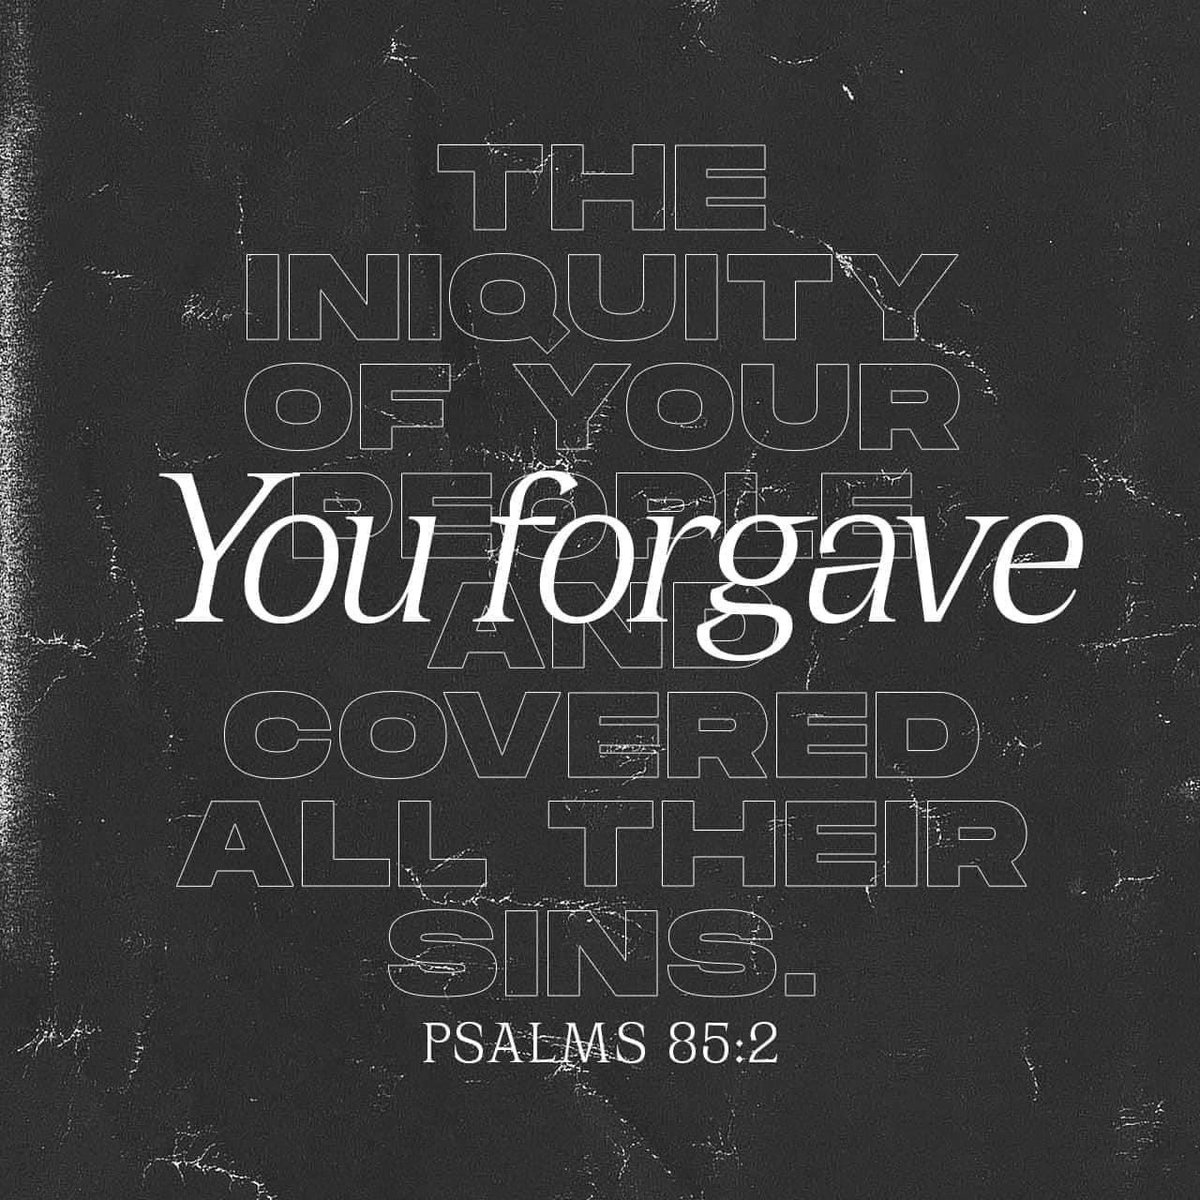 God forgave every sin.… ✝️1426✝️ @dorseyla3 @RondaR3023 @TurnSeattleRed @Grace_Saved_By @Bro_Charlsss @GunRangeGal @Lindangle74 @ForeverSooner @LadyConstance8 @rezfreed @USA4ever65 @Patrick7088 @TJLakers01 @SnooksBabyGirl @Theboops01 @OKwrights @dcpurcellgeorge @MacyStotty…